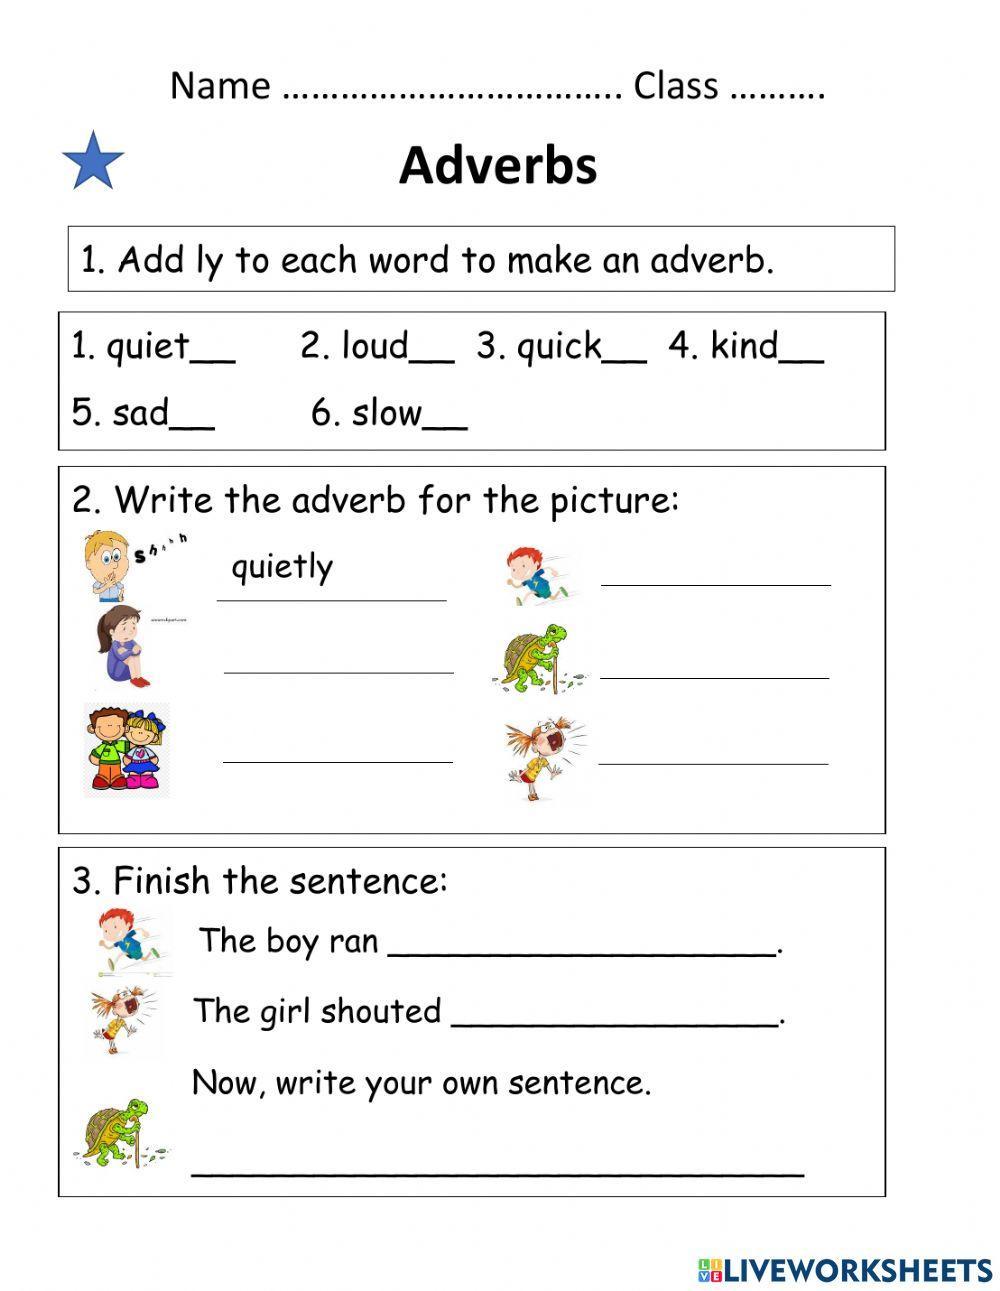 Adverbs ly - easy